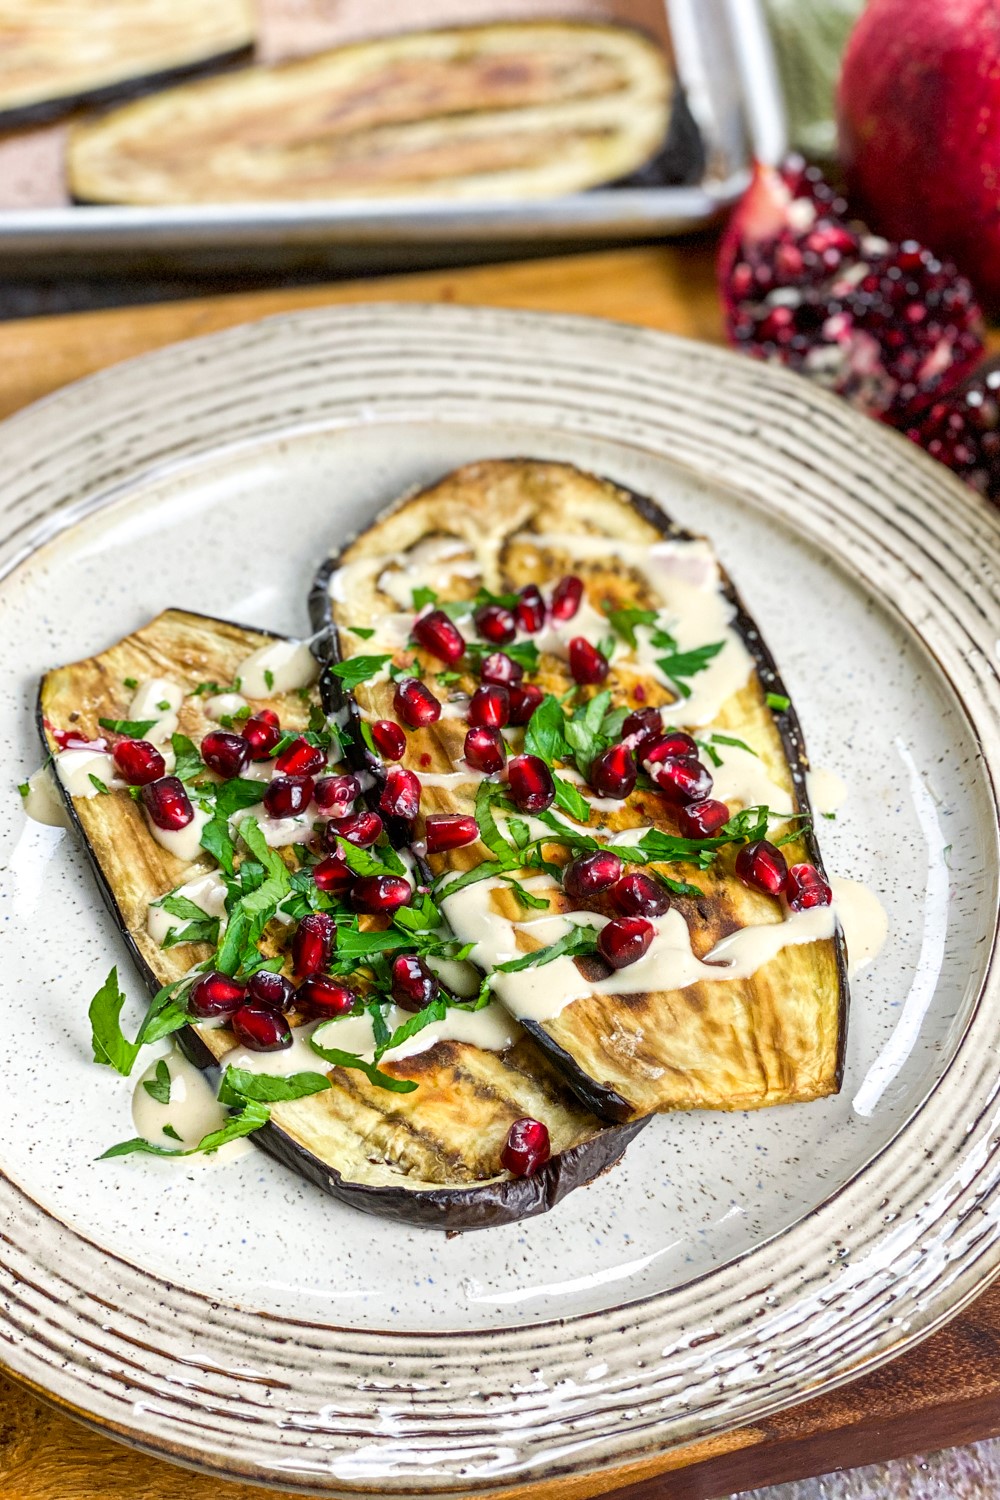 Roasted Eggplant with Pomegranate & Tahini Dressing is a delectable Middle Eastern inspired dish that's great as a side or a vegetarian meal.